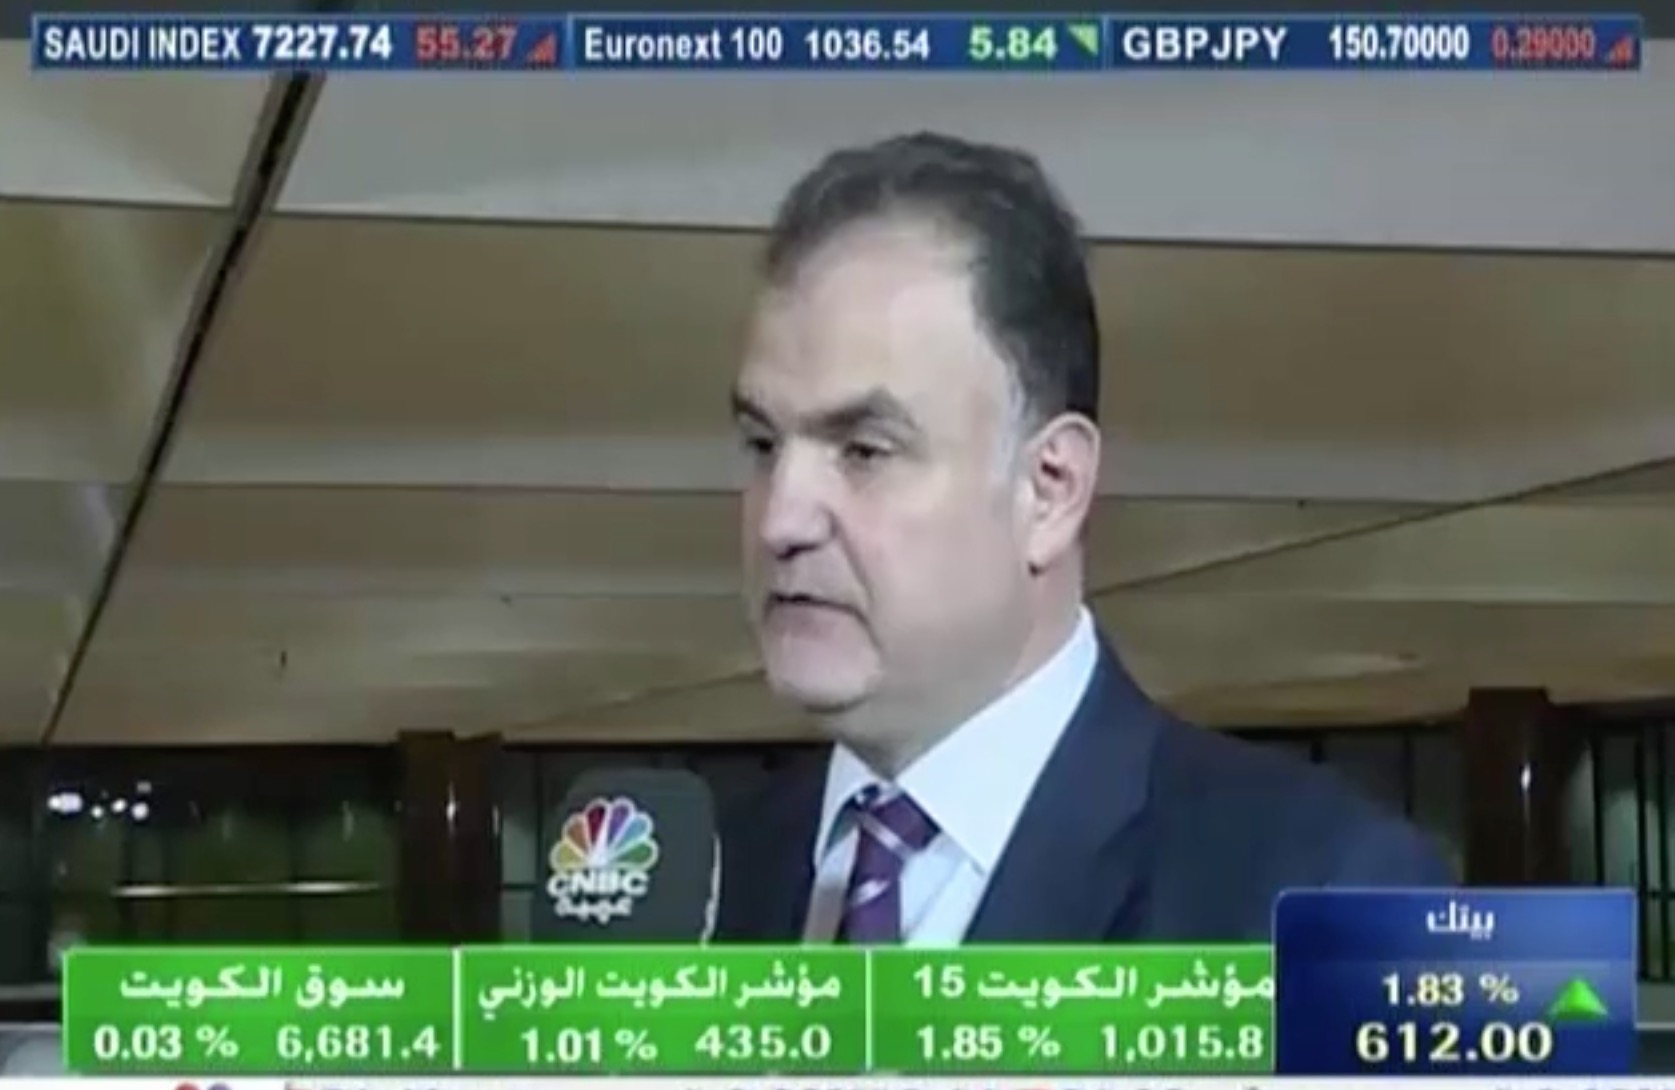 Interview with the Managing Director of Mena Asset Management D.  Husayn Shahrour on CNBC - Arabia